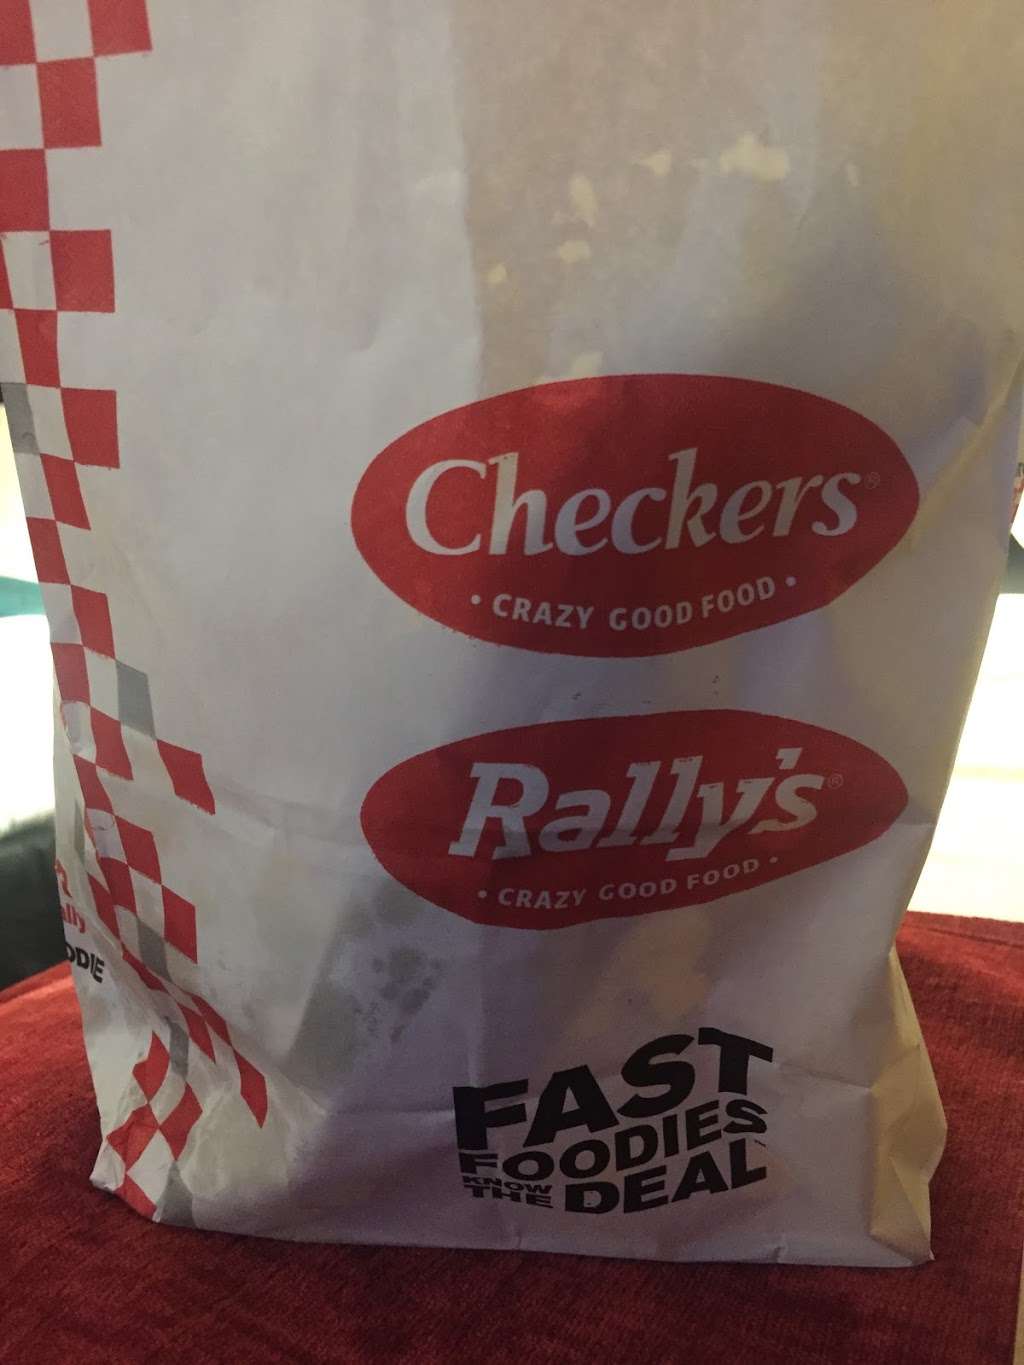 Checkers | 6899 Baltimore Annapolis Blvd, Linthicum Heights, MD 21090, USA | Phone: (410) 789-5326